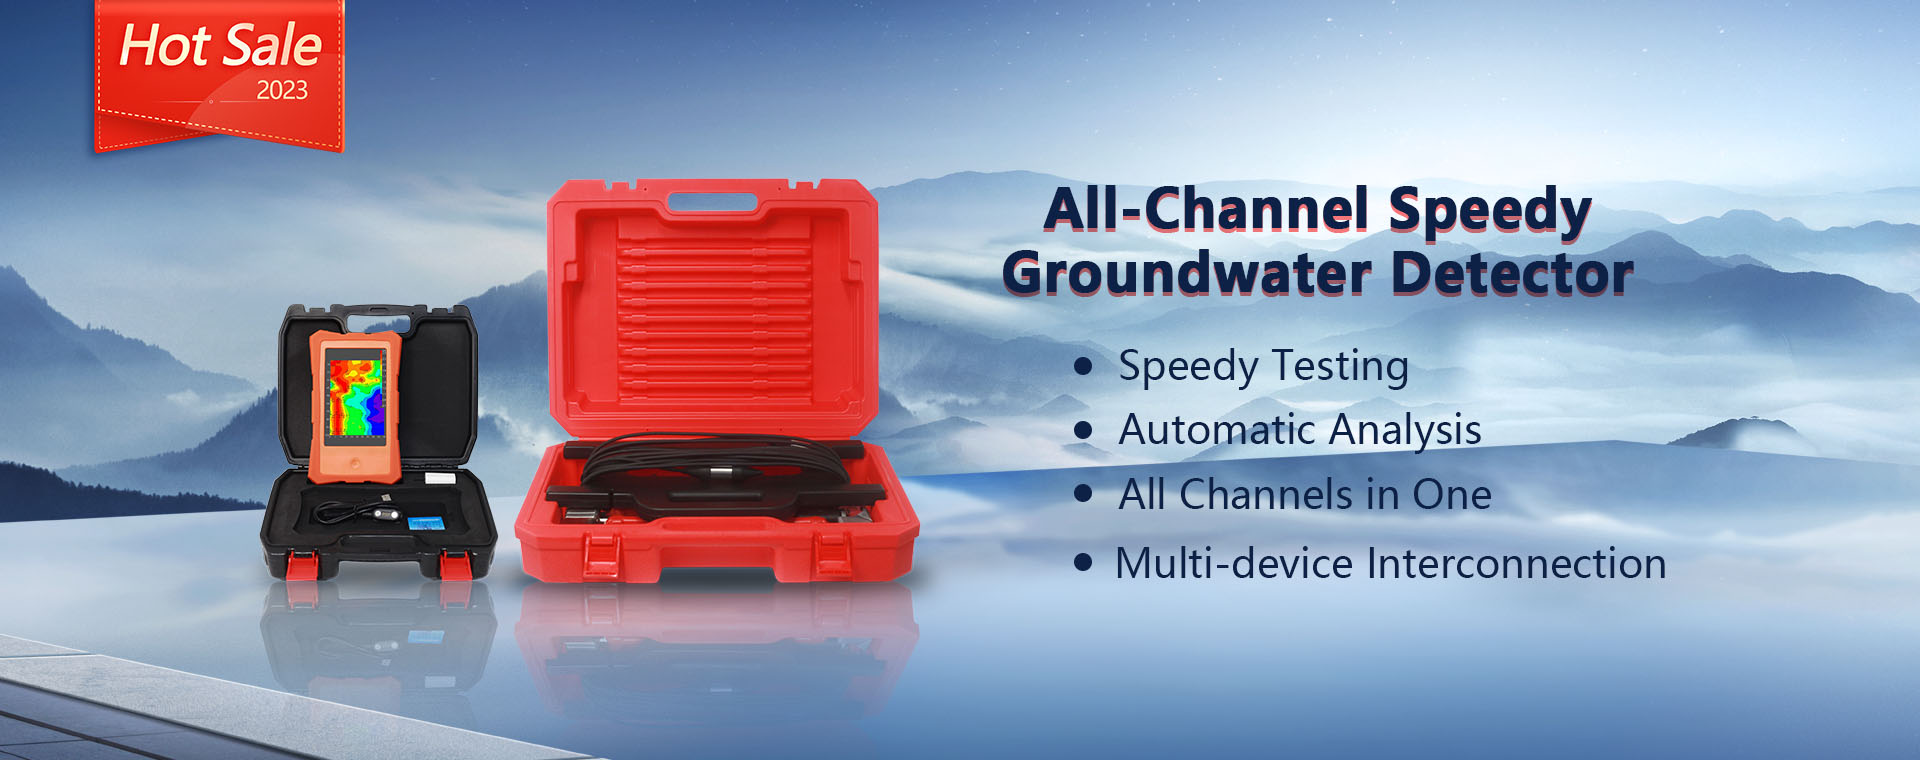 ADMT ZN series water detector